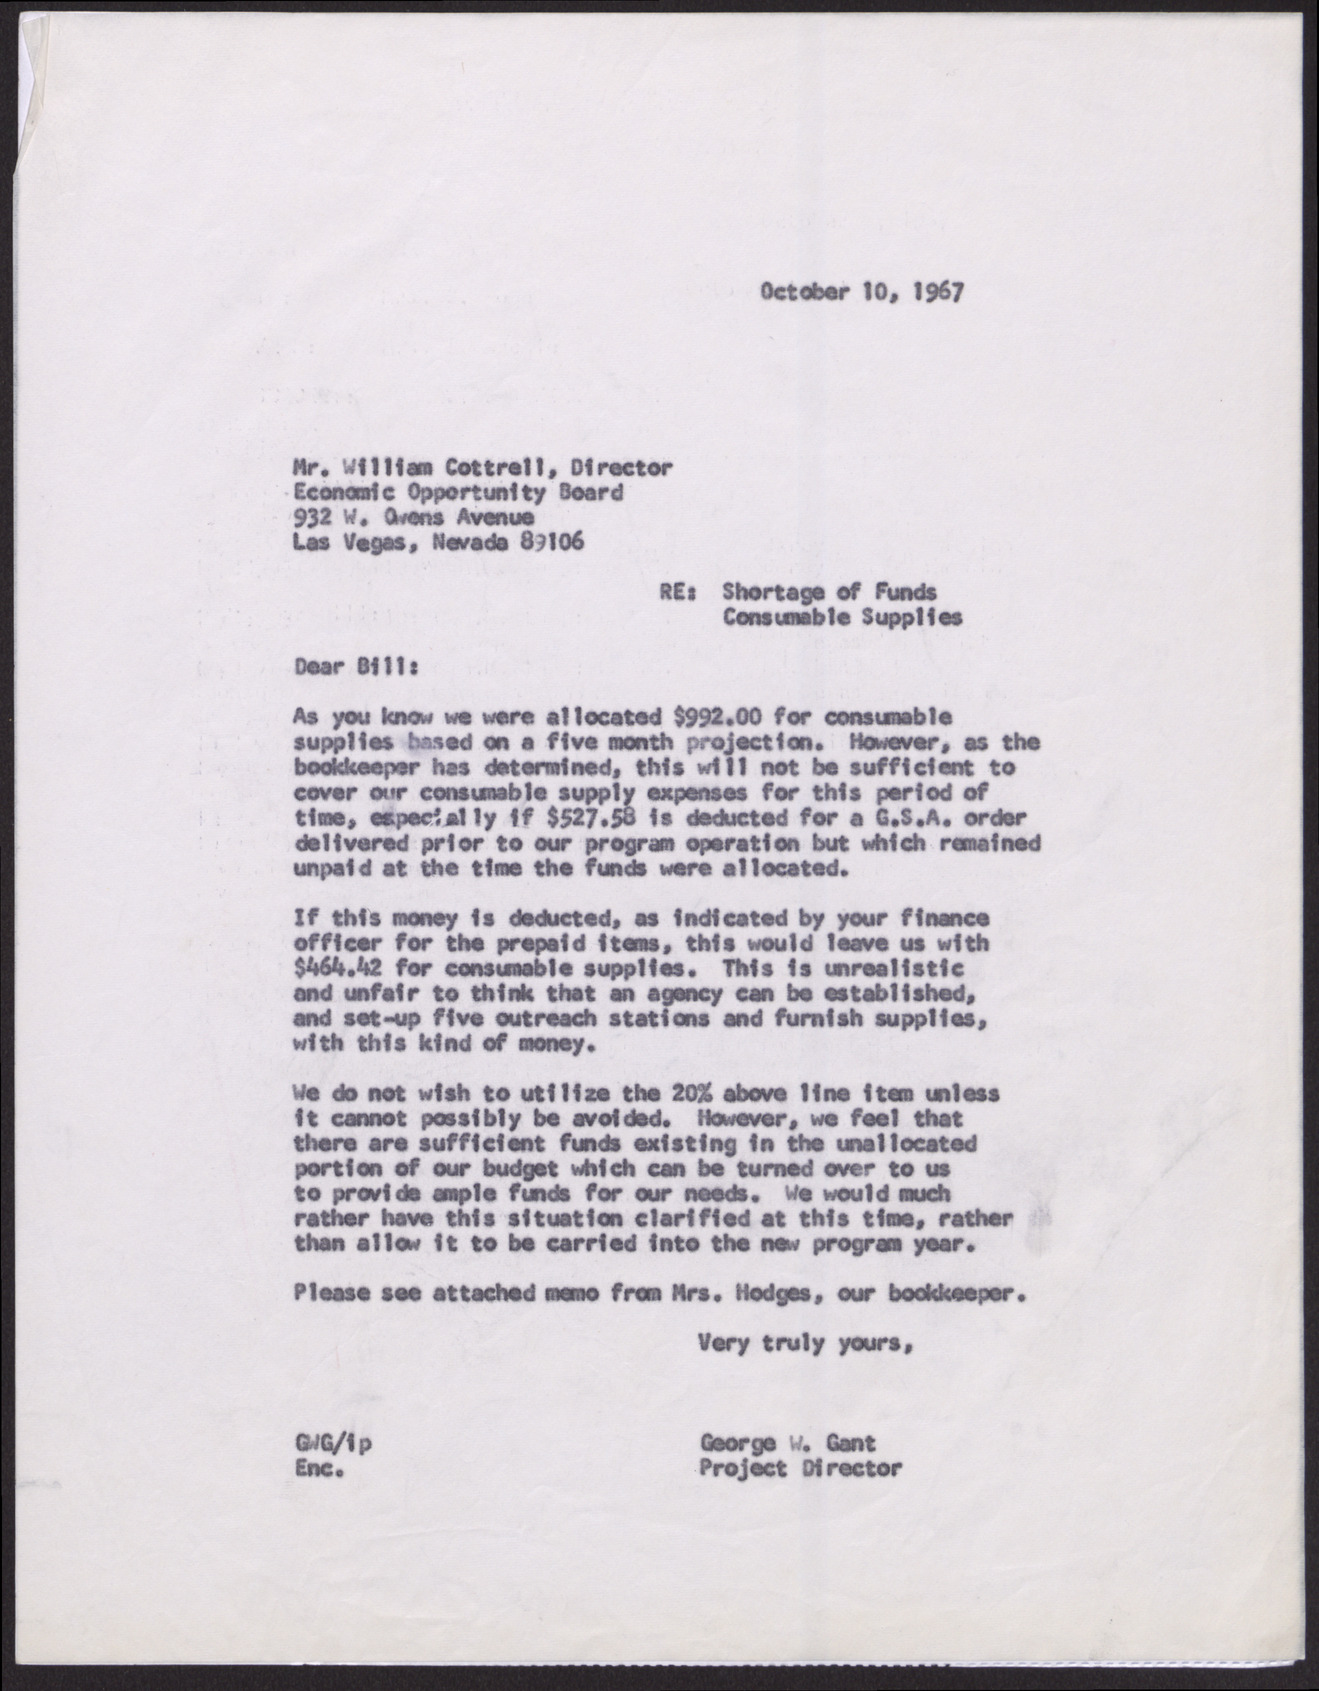 Letter to Mr. William Cottrell from George W. Gant, October 10, 1967